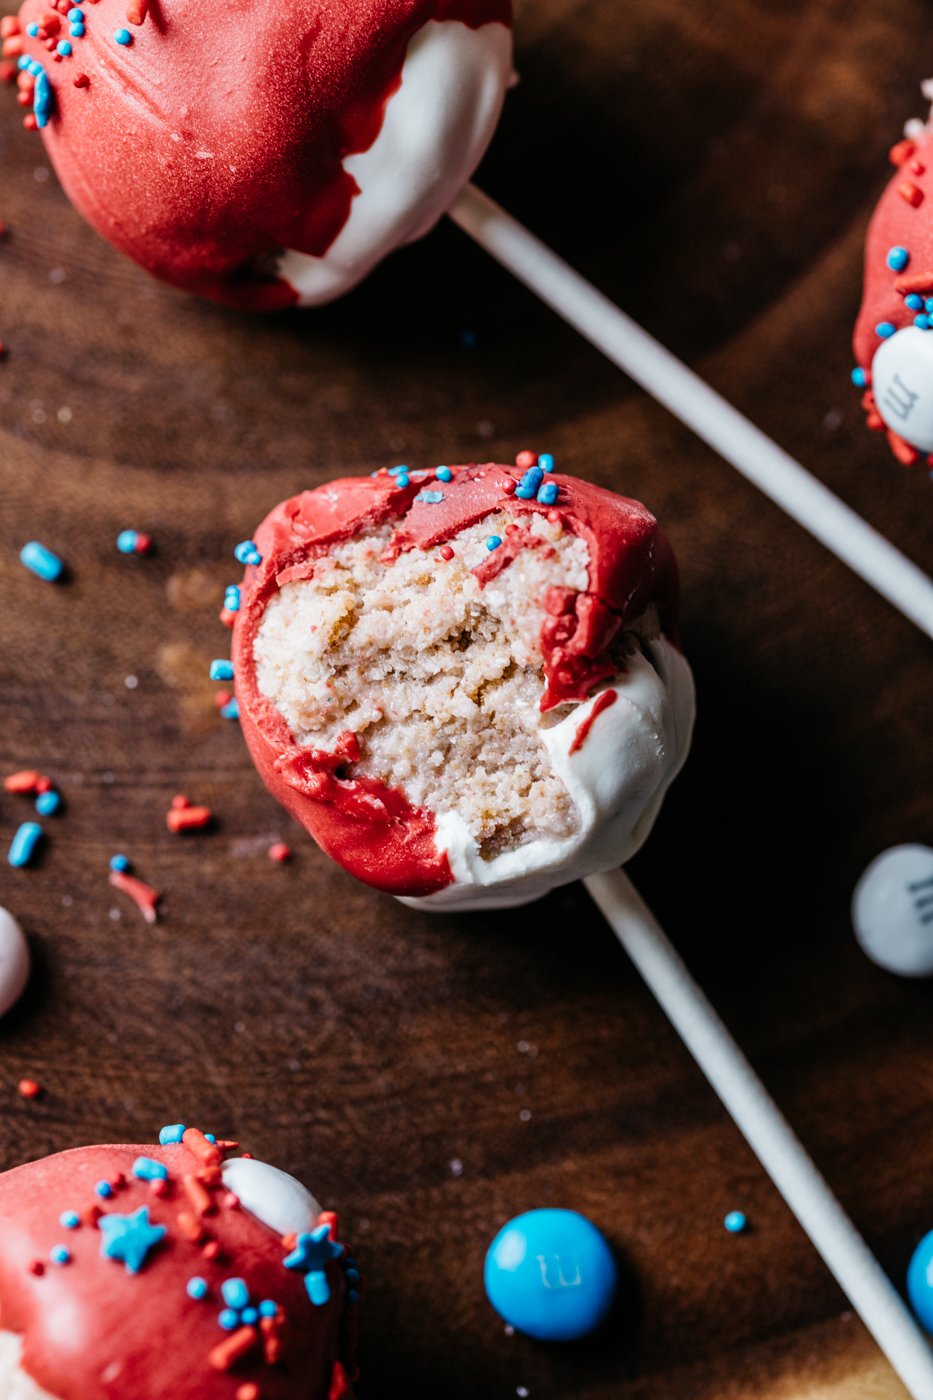 cupcake pops, cake pops recipe, pillsbury stars and stripes, 4th of july baking, the kentucky gent, southern cooking blog